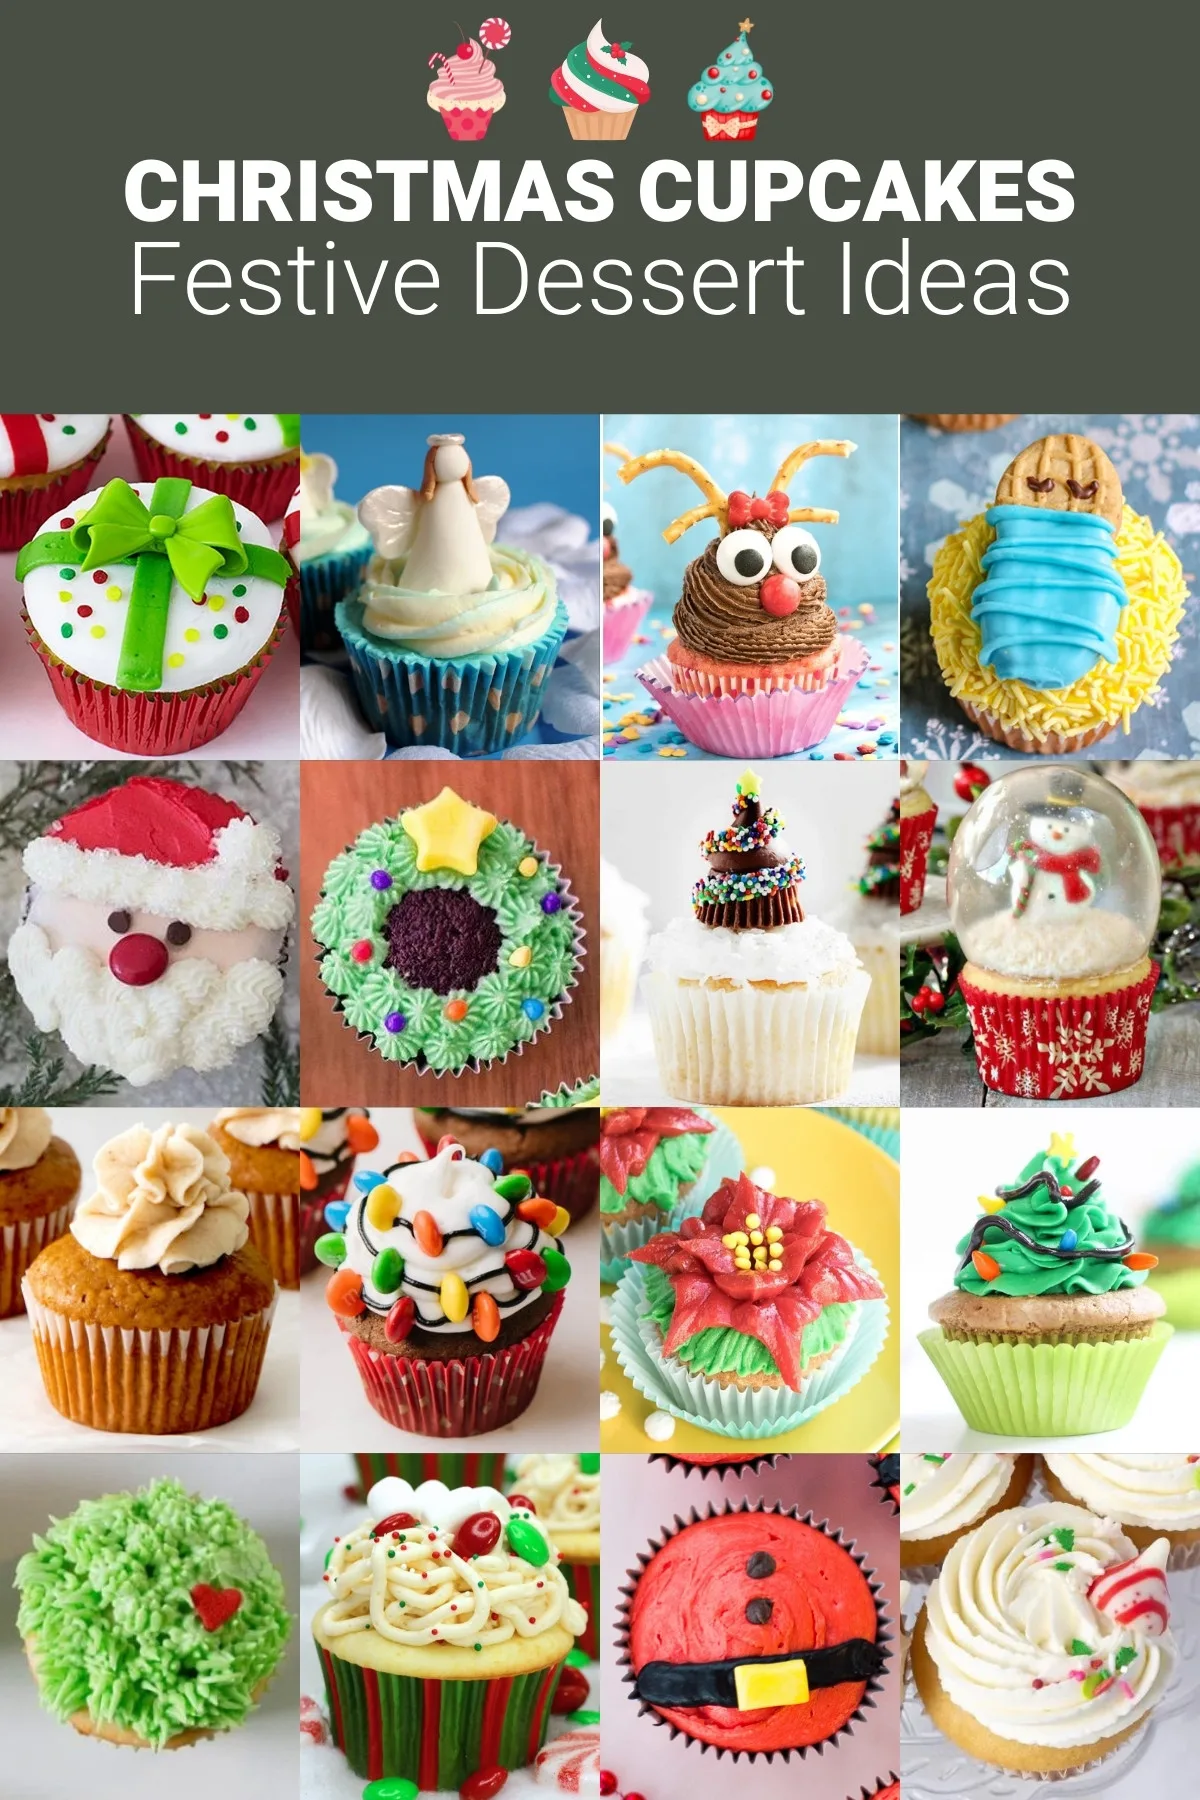 Christmas Cupcakes Perfect for the Holidays - DIY Candy